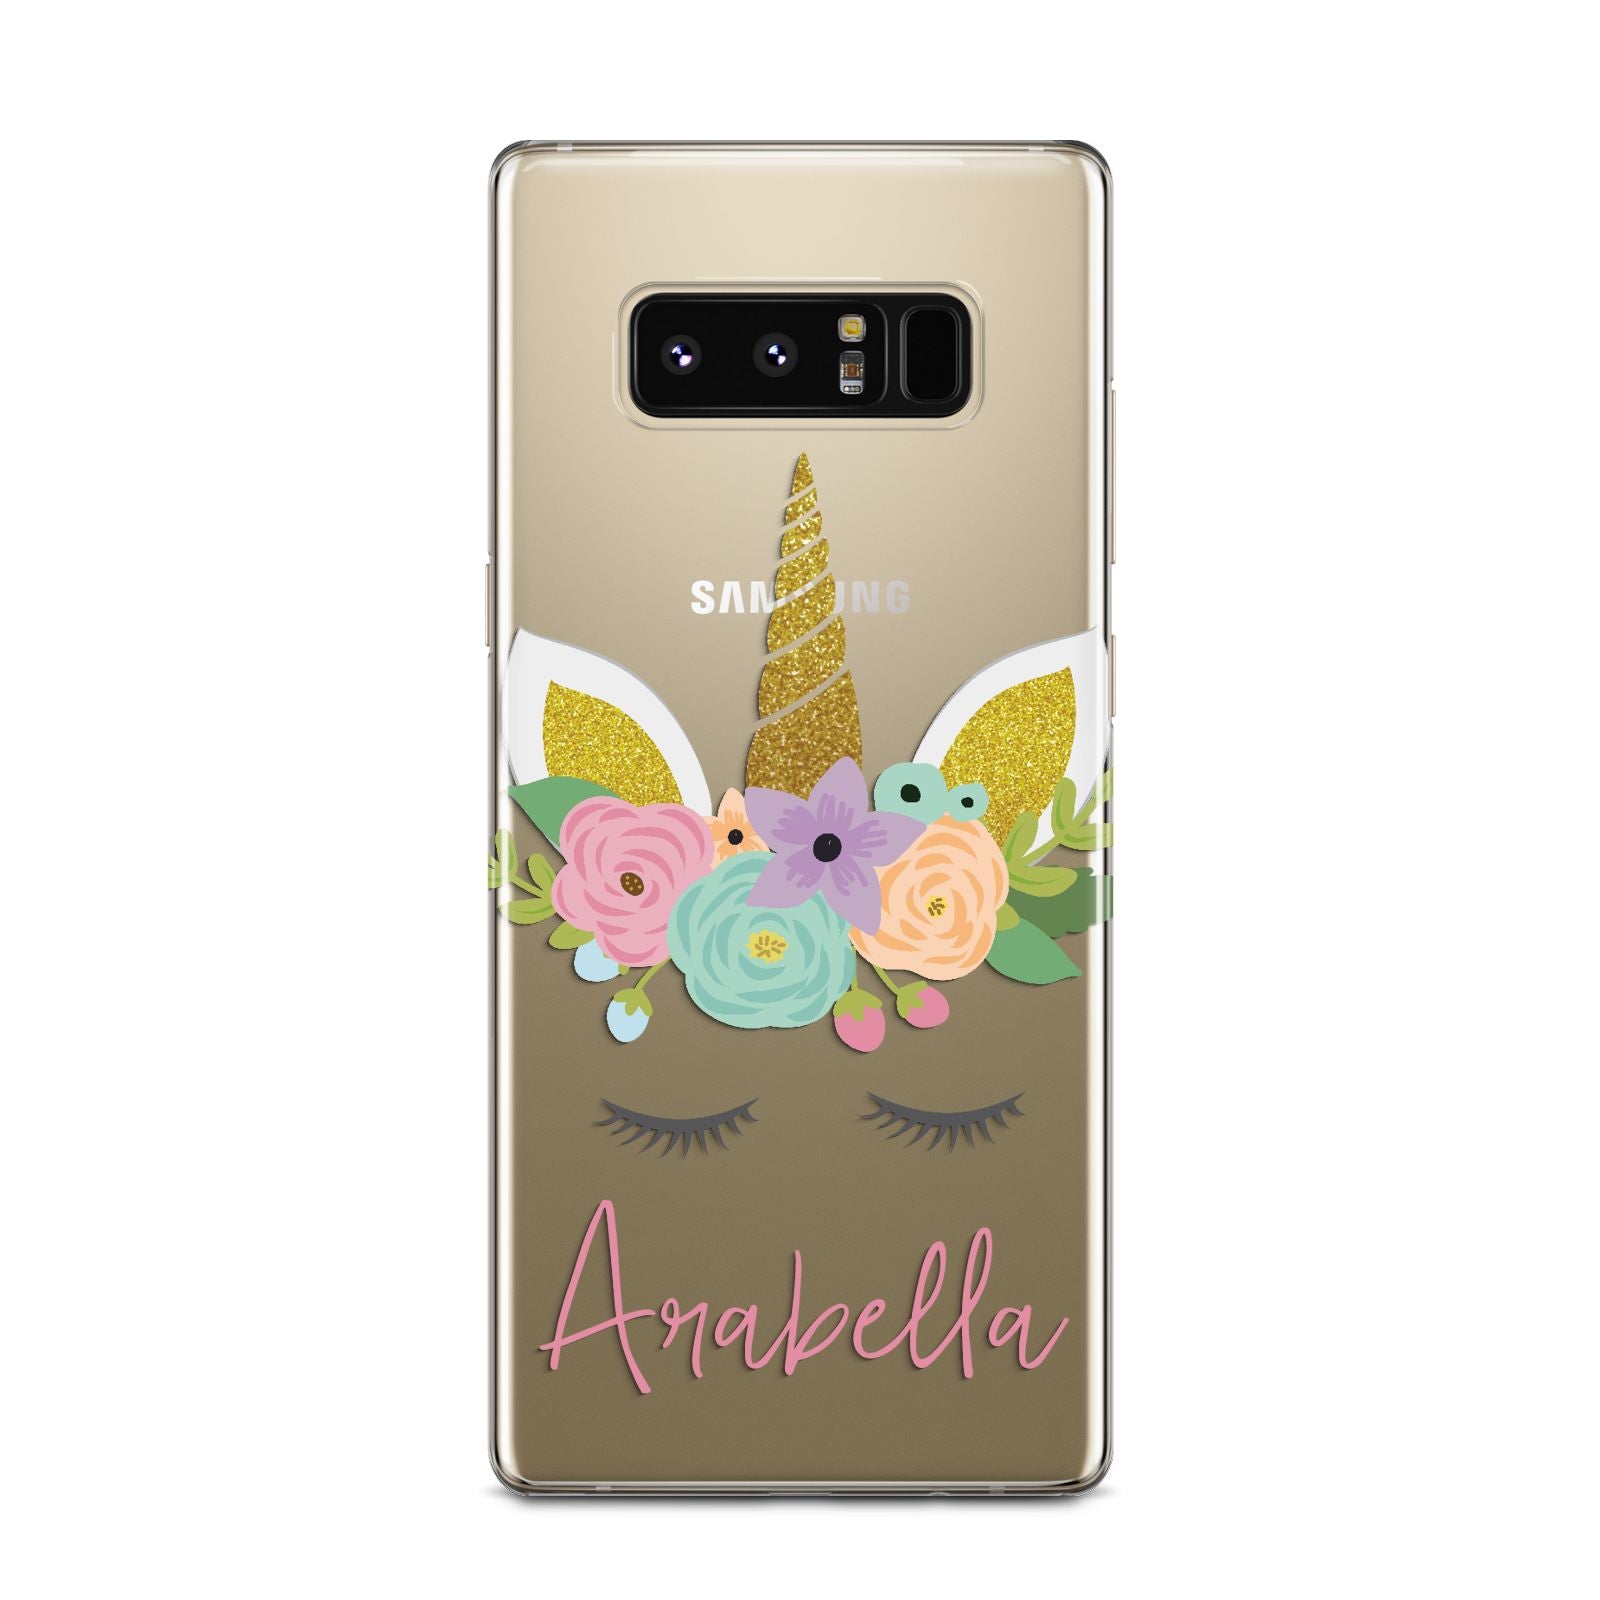 Personalised Unicorn Face Samsung Galaxy Note 8 Case